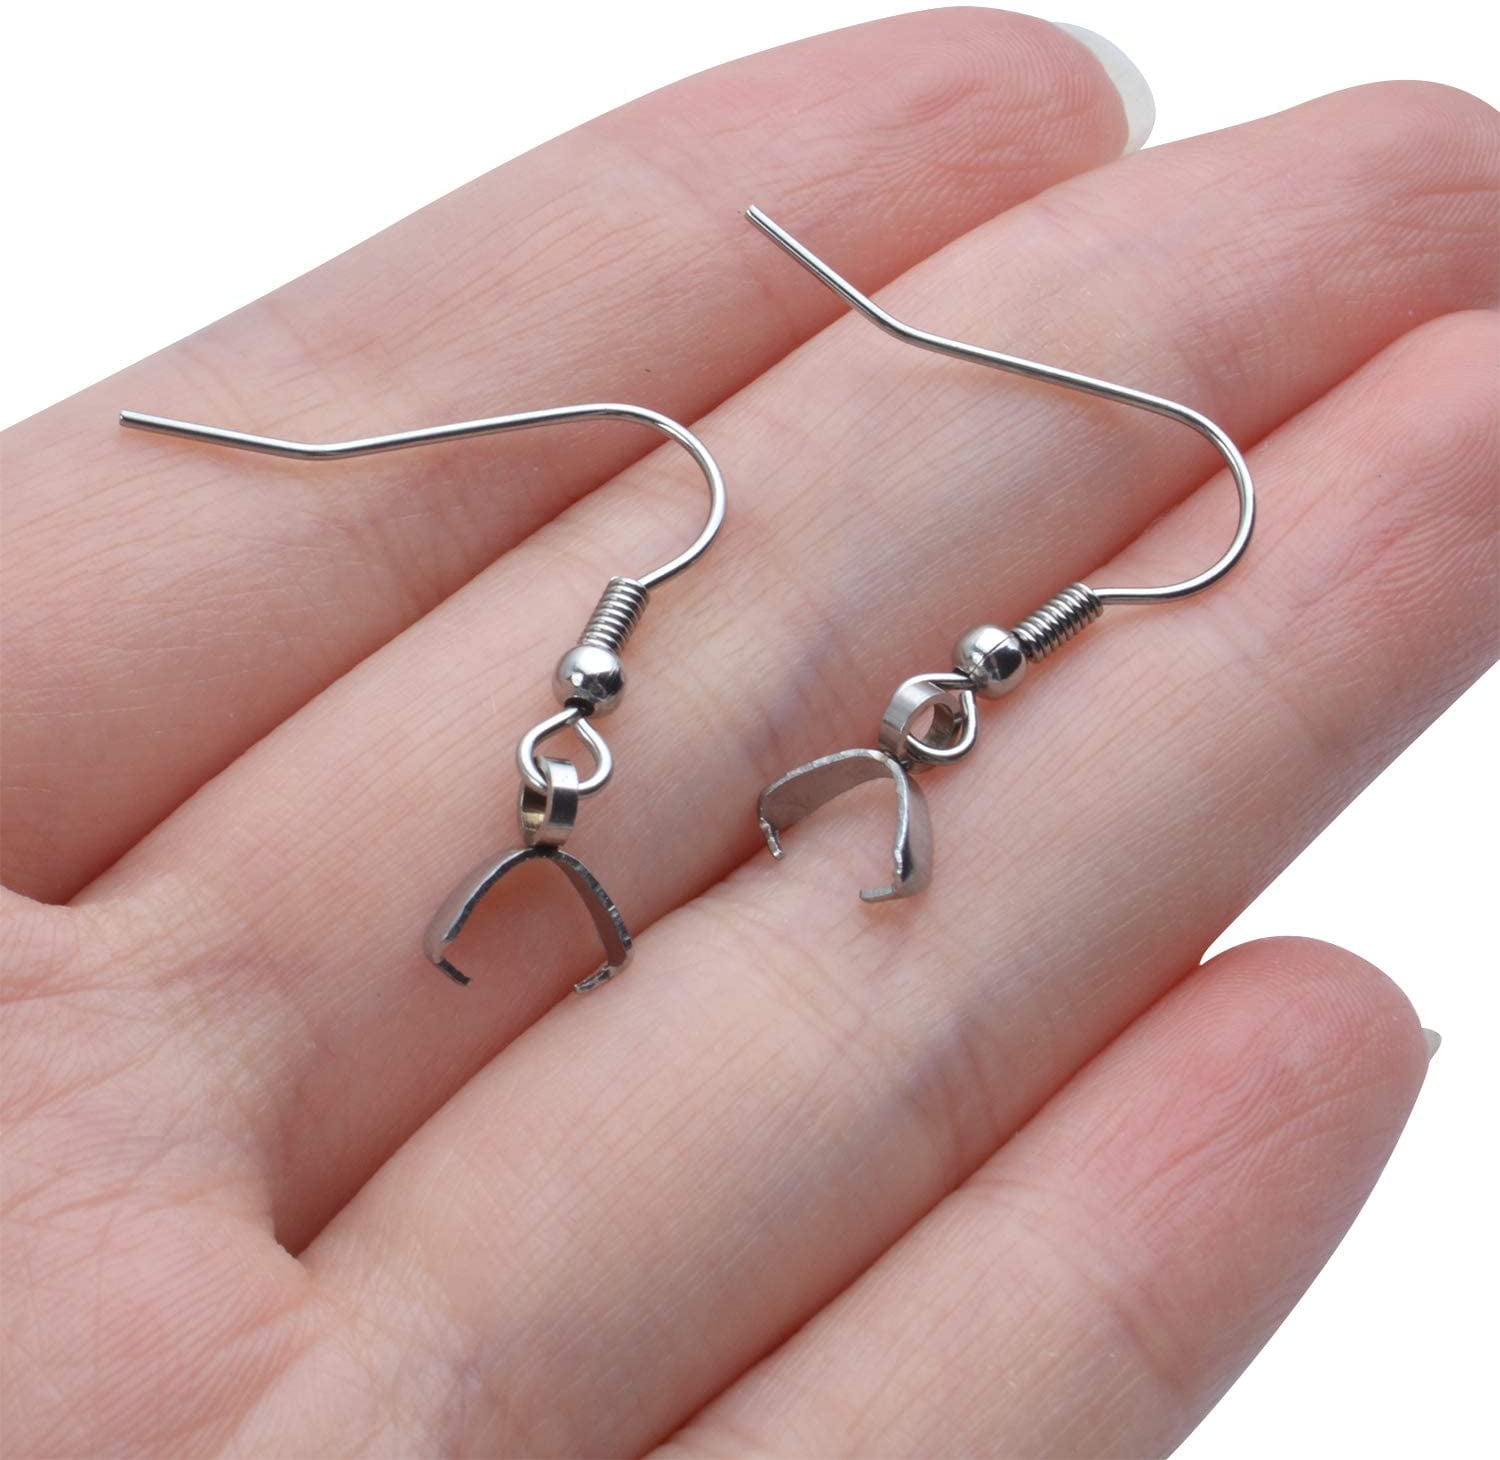 50pcs/lot Anti Allergy Stainless Steel Earring Hooks Findings Hypoallergenic  Earrings Clasp Wire Supplies For Diy Jewelry Making